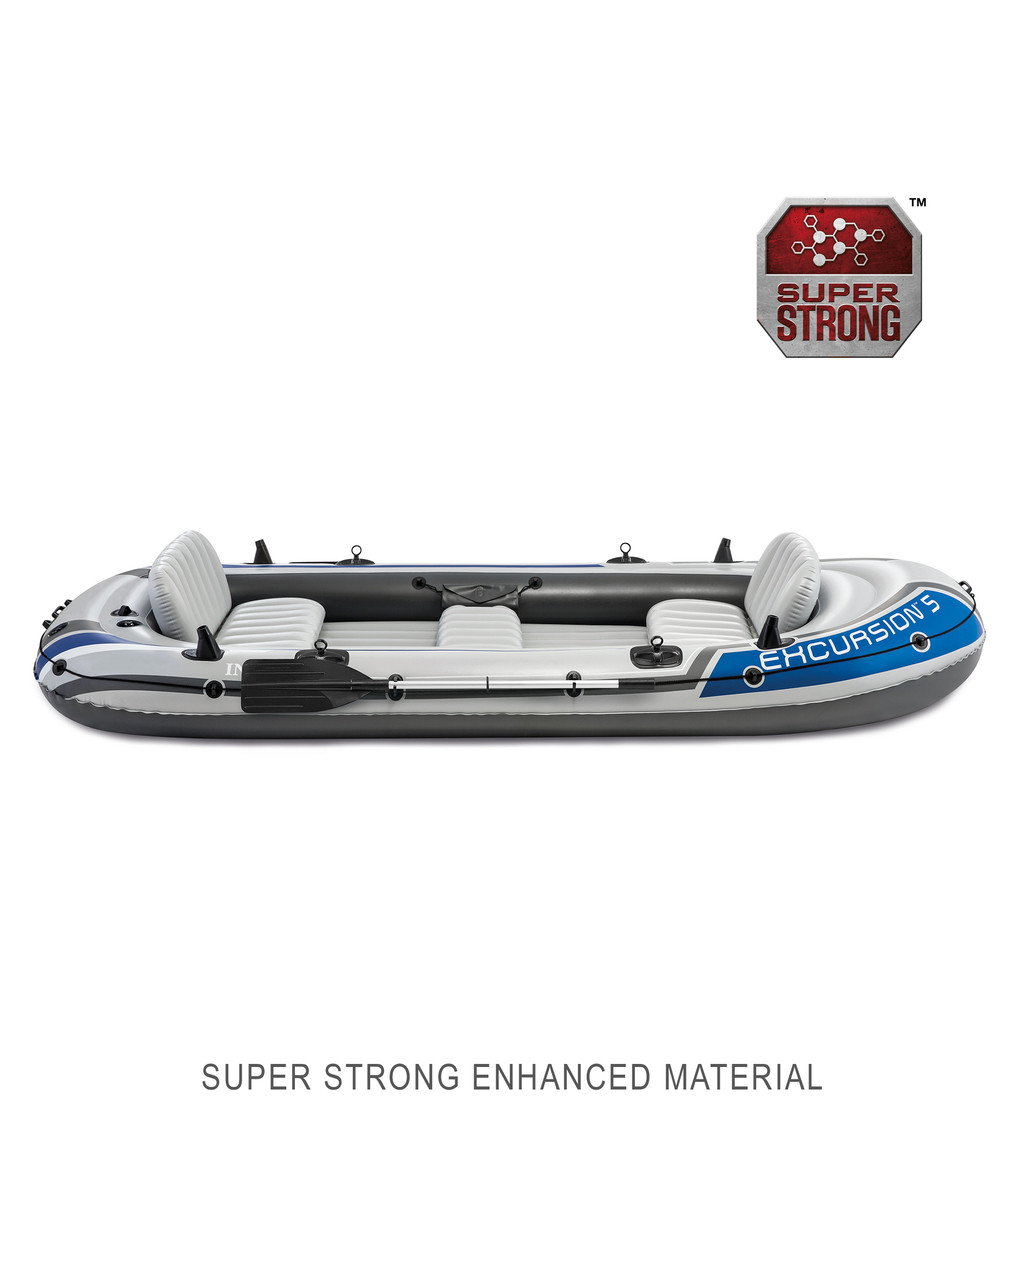 Excursion™ 5 Inflatable Boat Set - 5 Person